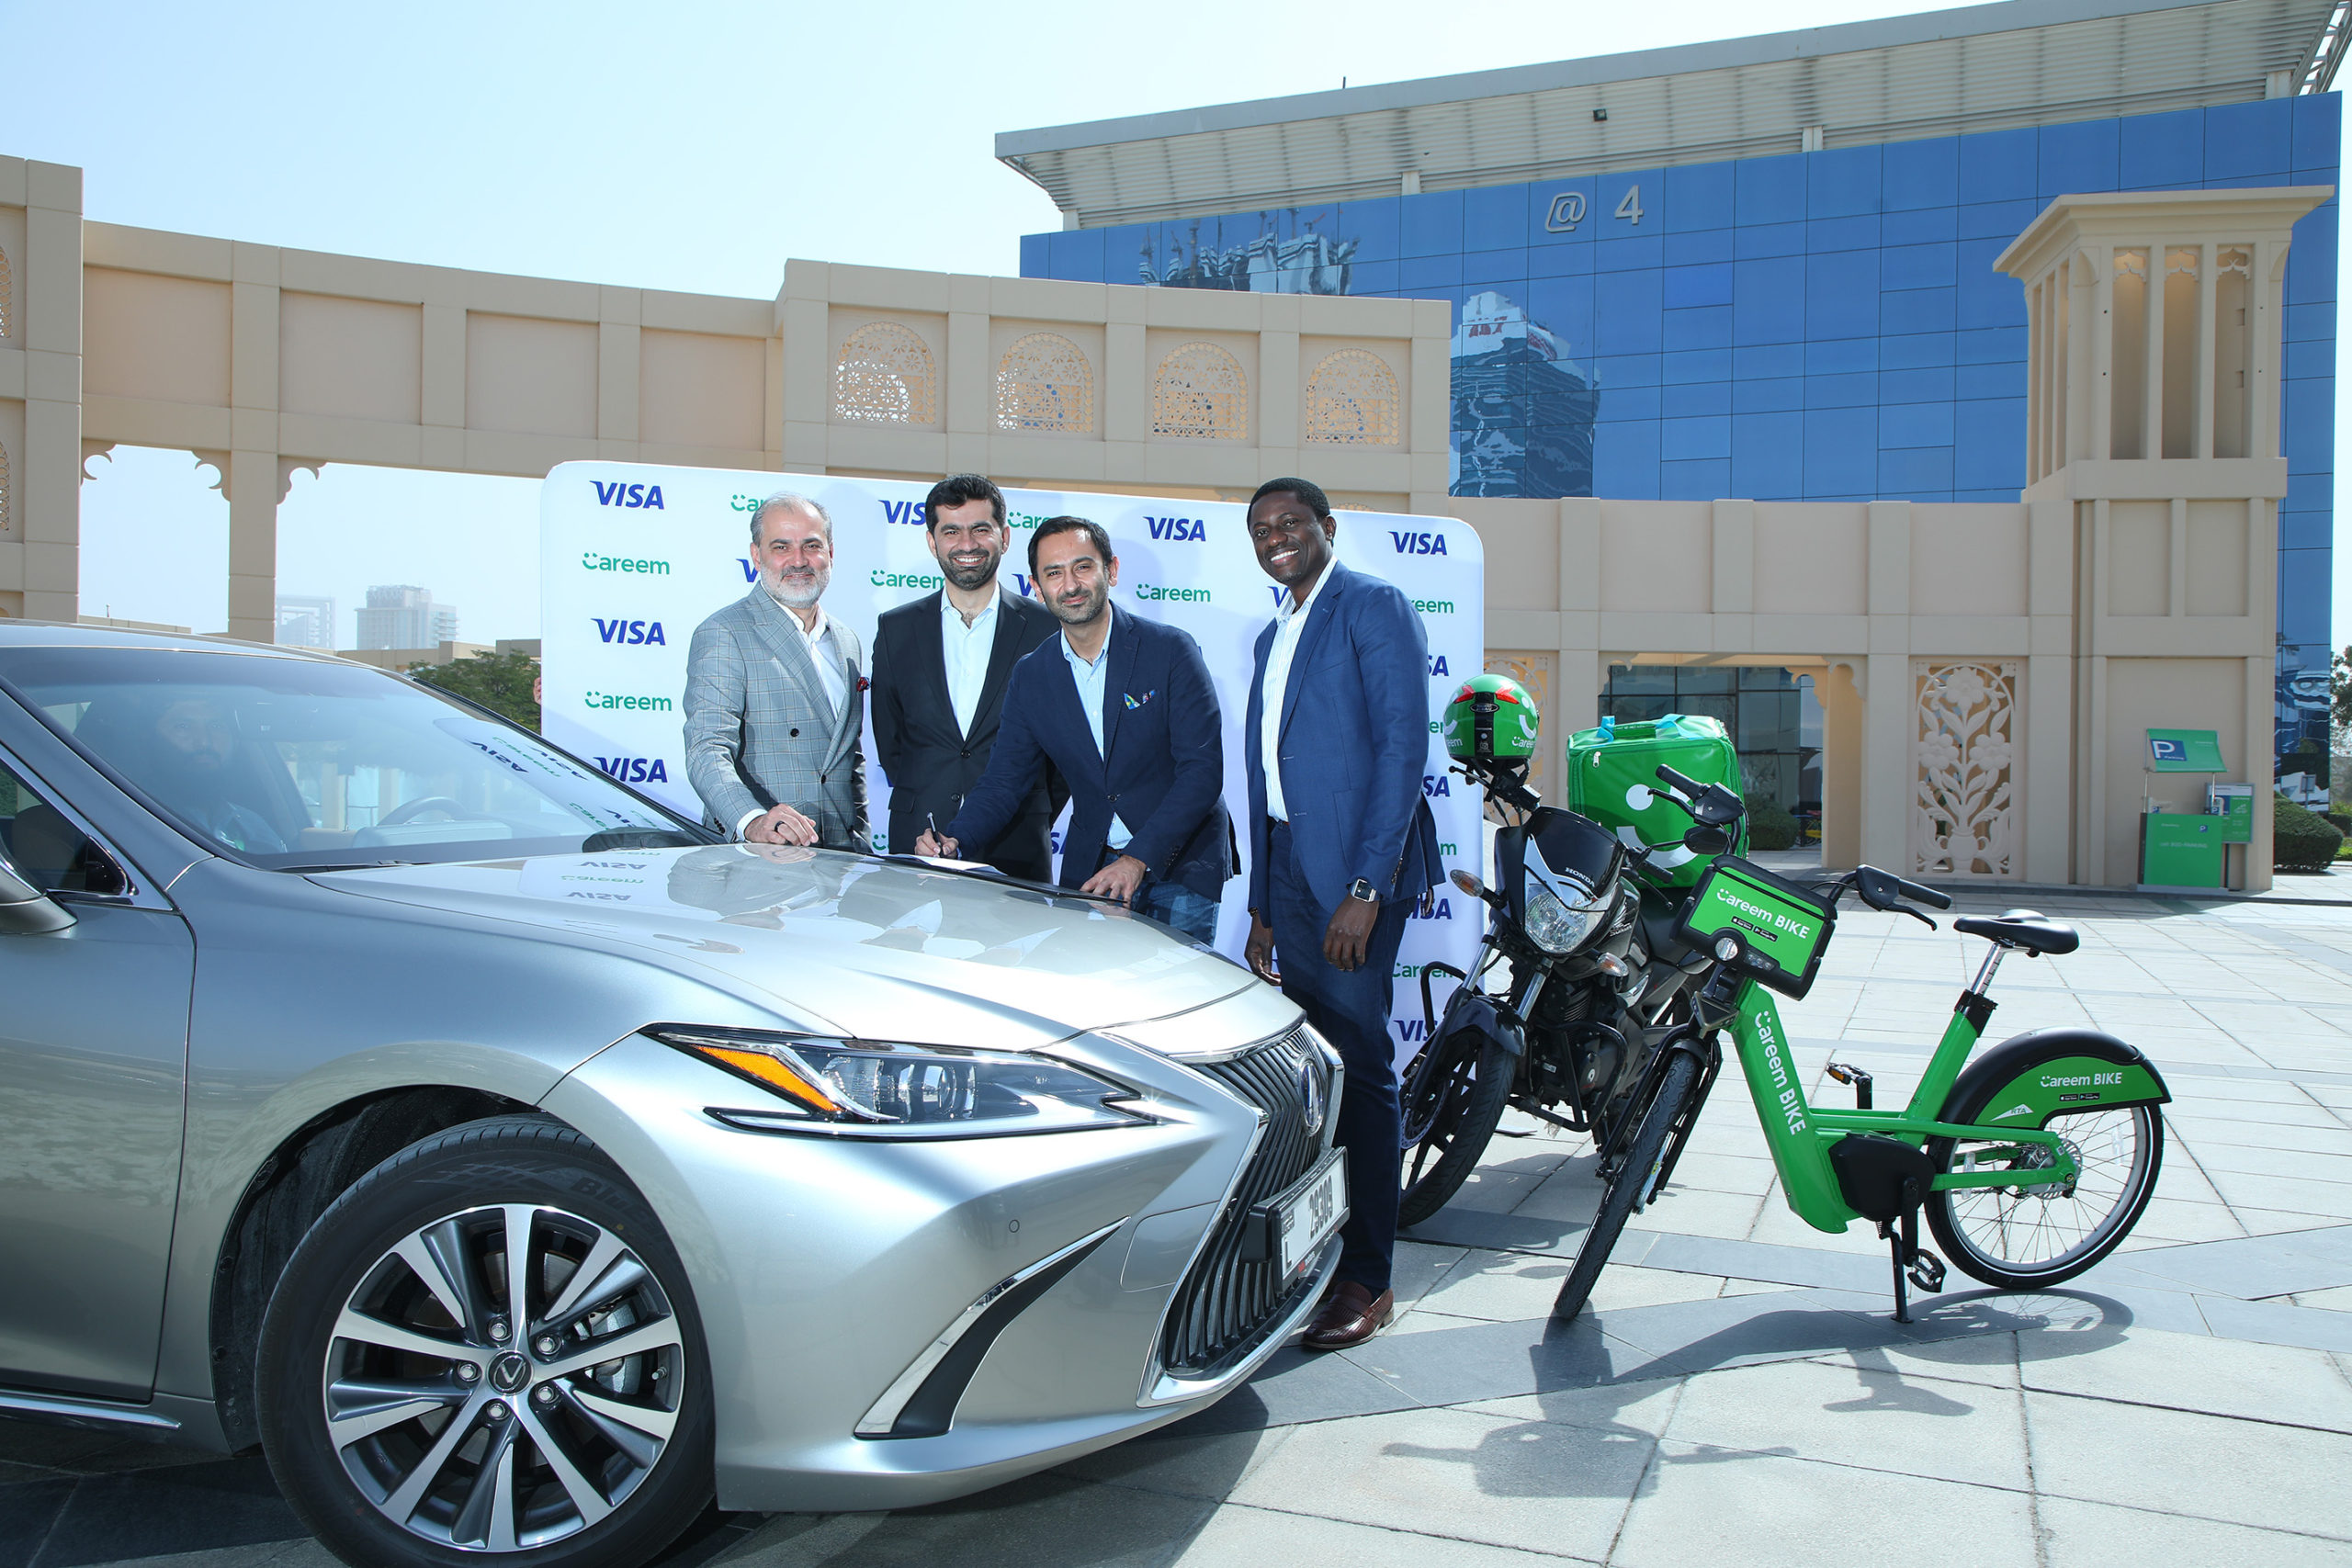 Image for Careem And Visa Sign Landmark Partnership To Accelerate Cashless Payments And Digital Financial Inclusion Across Middle East And North Africa Region